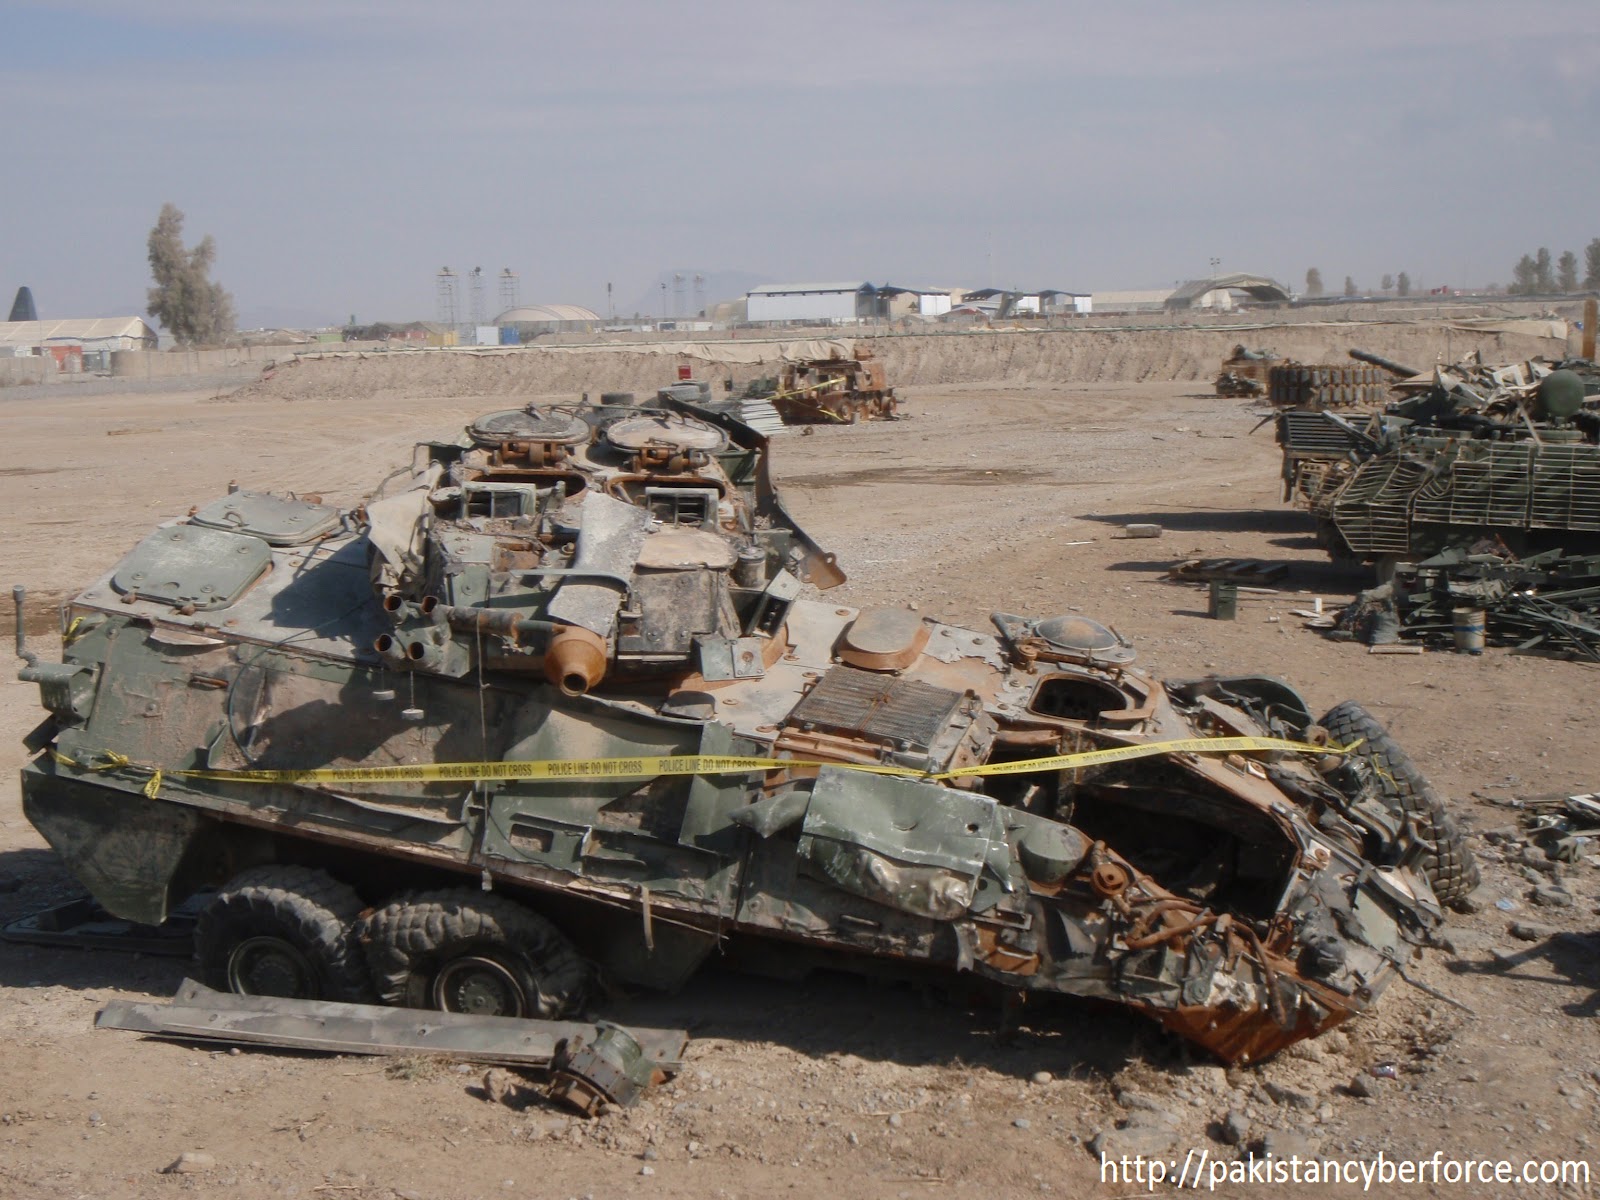 Light+Terrorist+Armoured+Vehicle+wrecked+in+a+powerful+IED+attack+by+Mujahideen.jpg